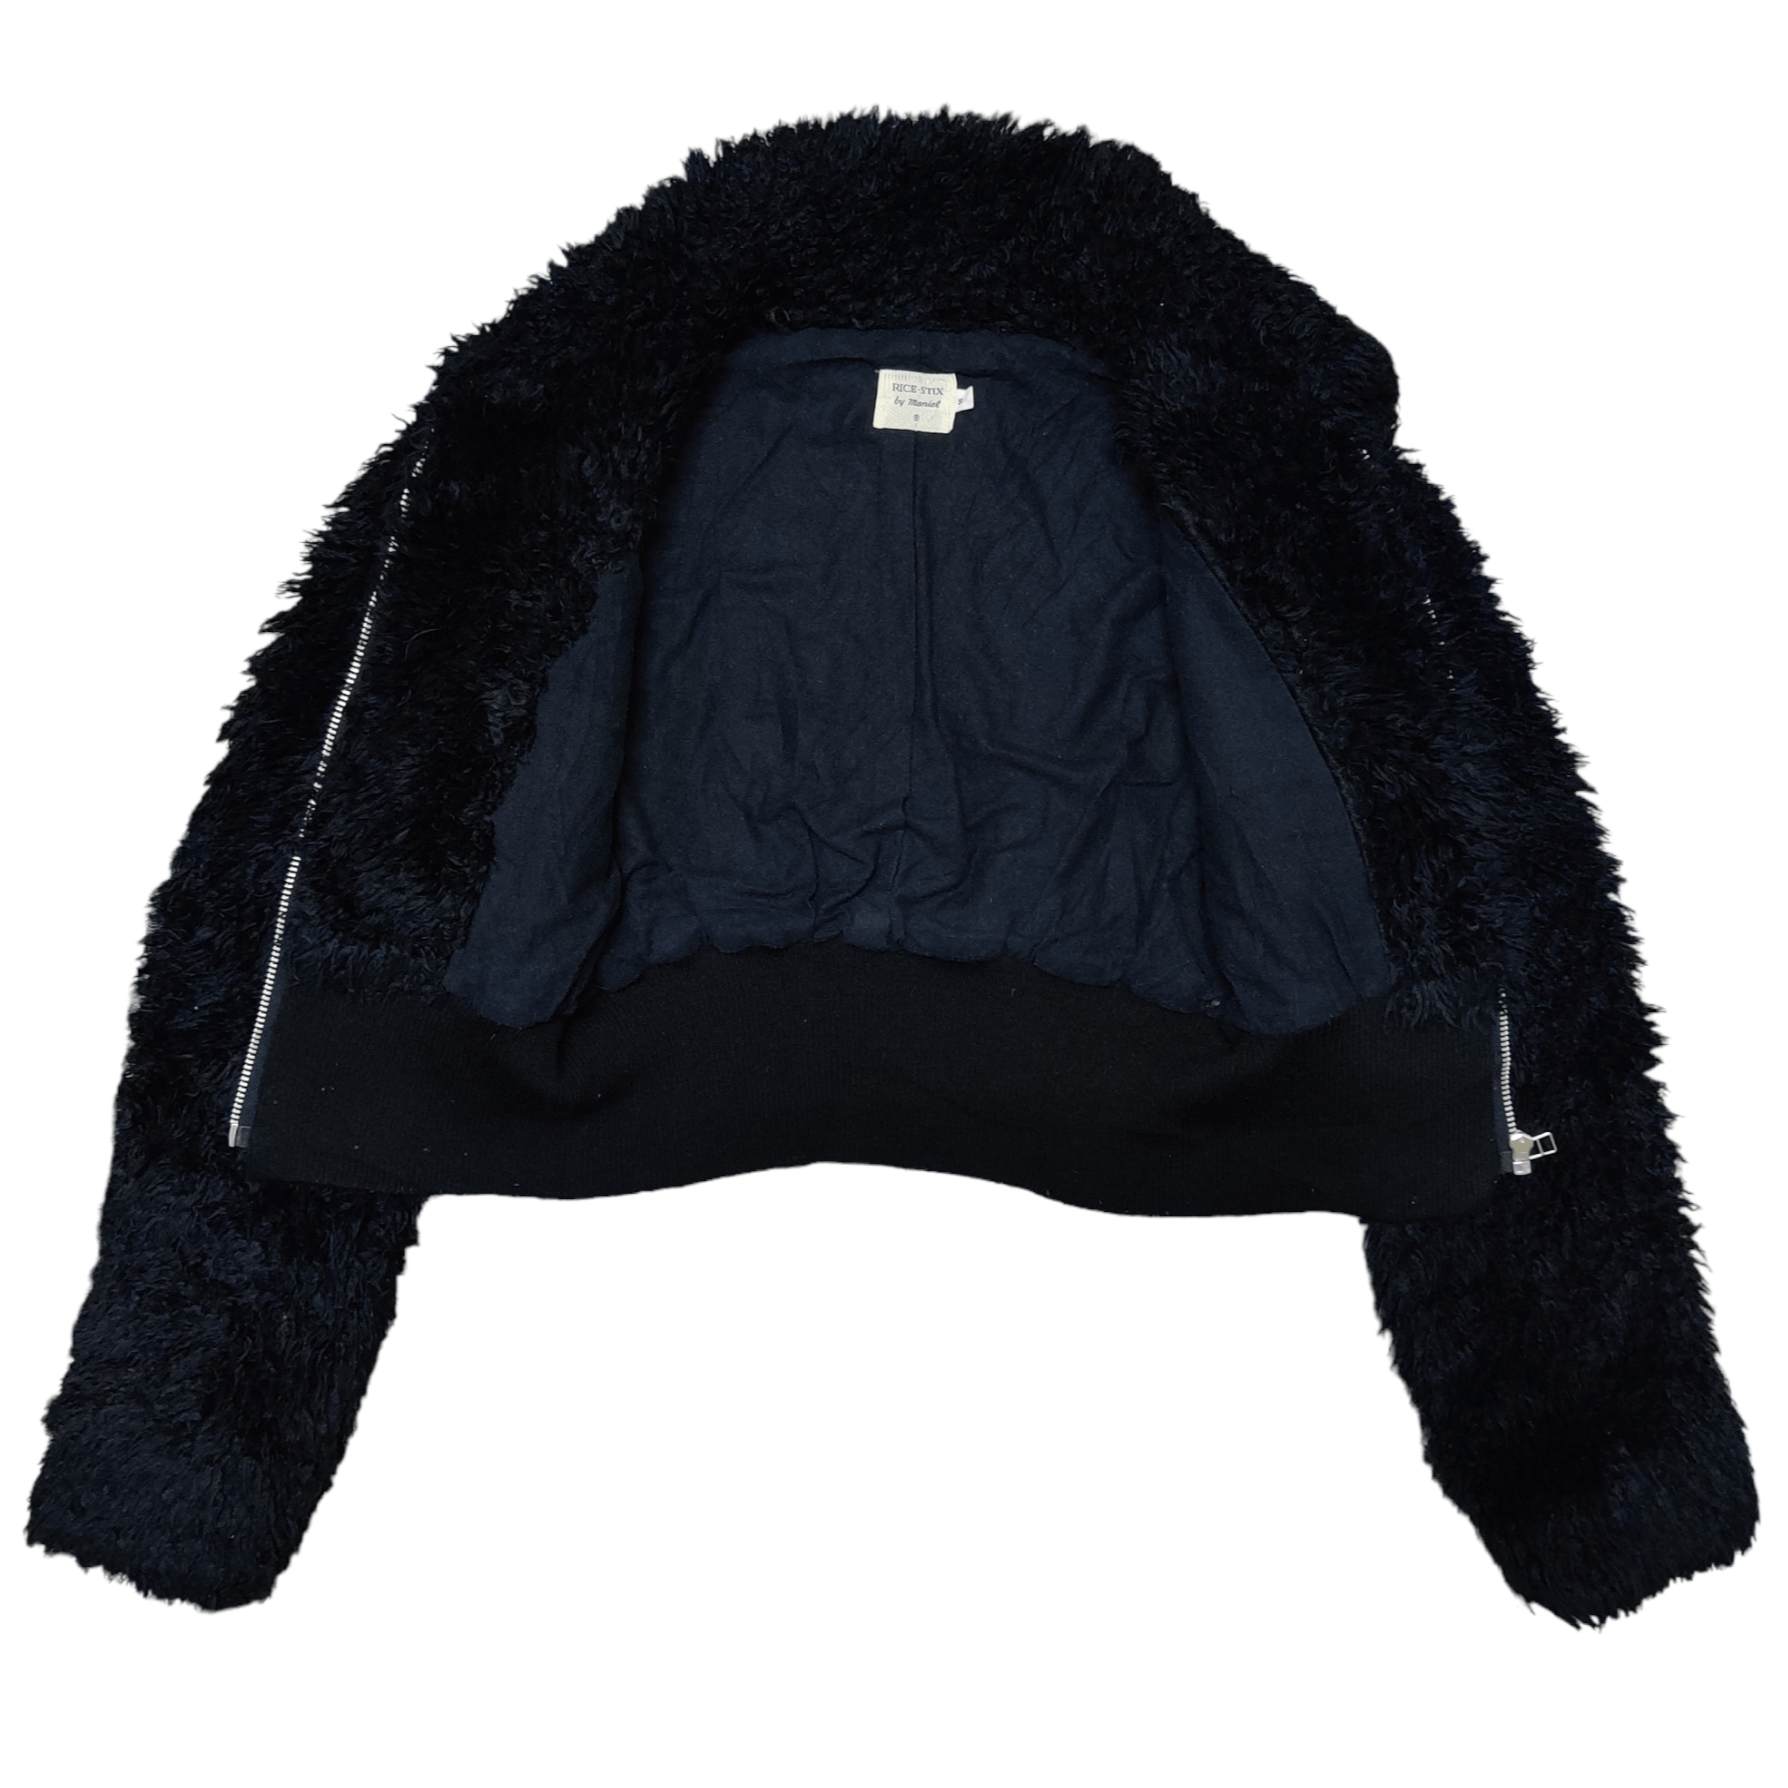 Archival Clothing - Vintage Japanese Brand Rice-Stix by Manial Fur Zip Up - 4